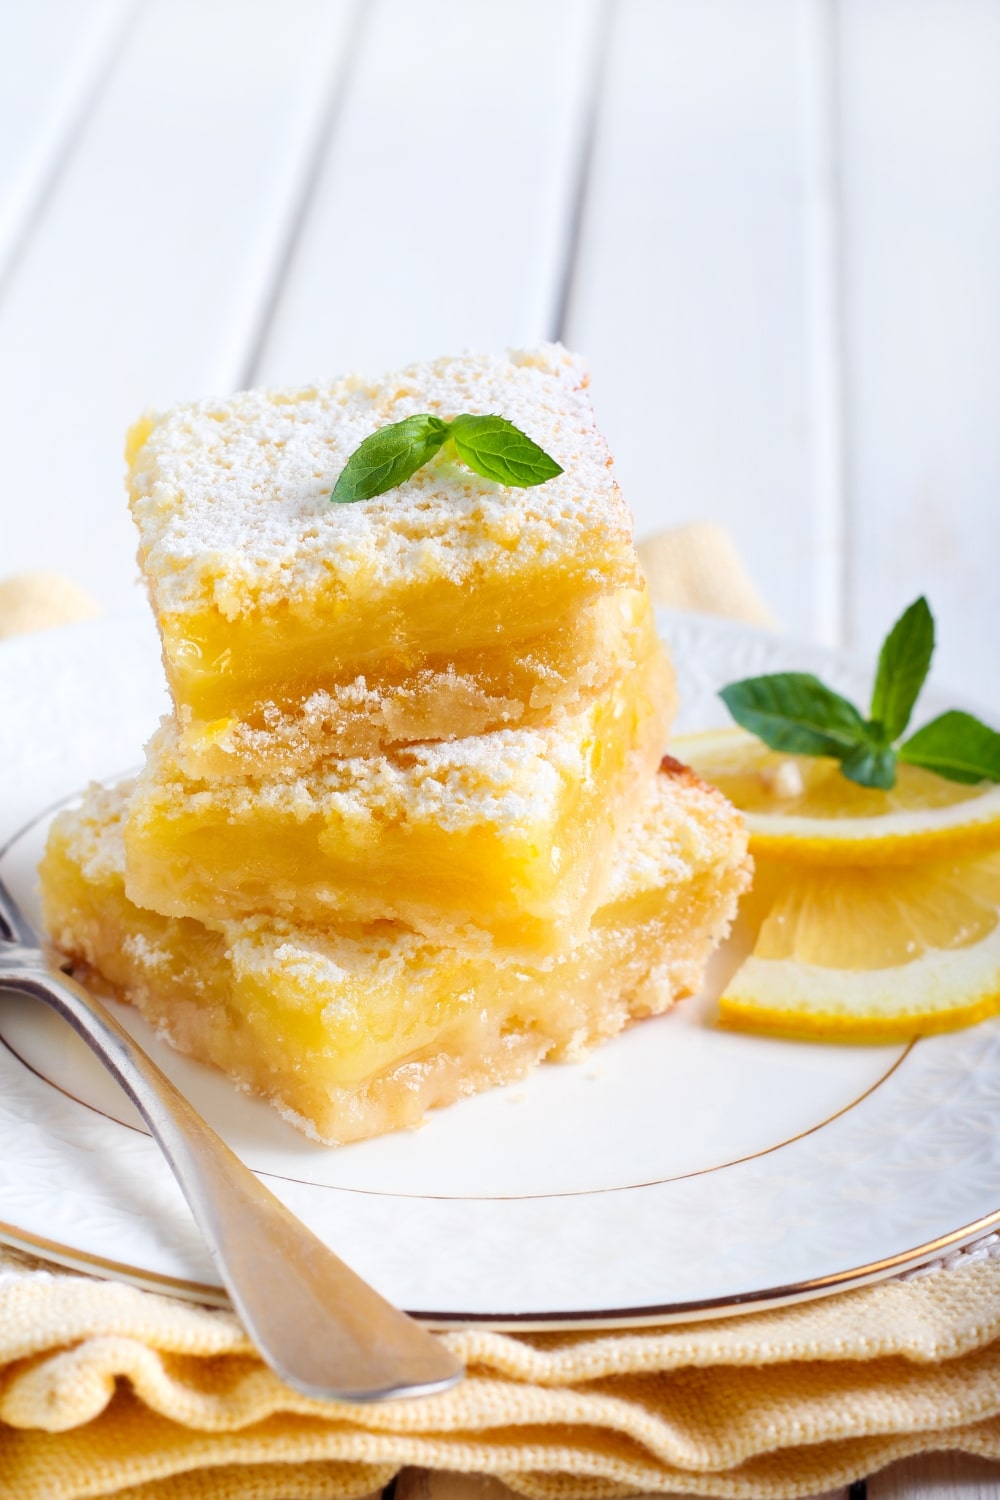 A stack of 3 lemon bars on a plate with a fork and some lemon slices and mint garnish.